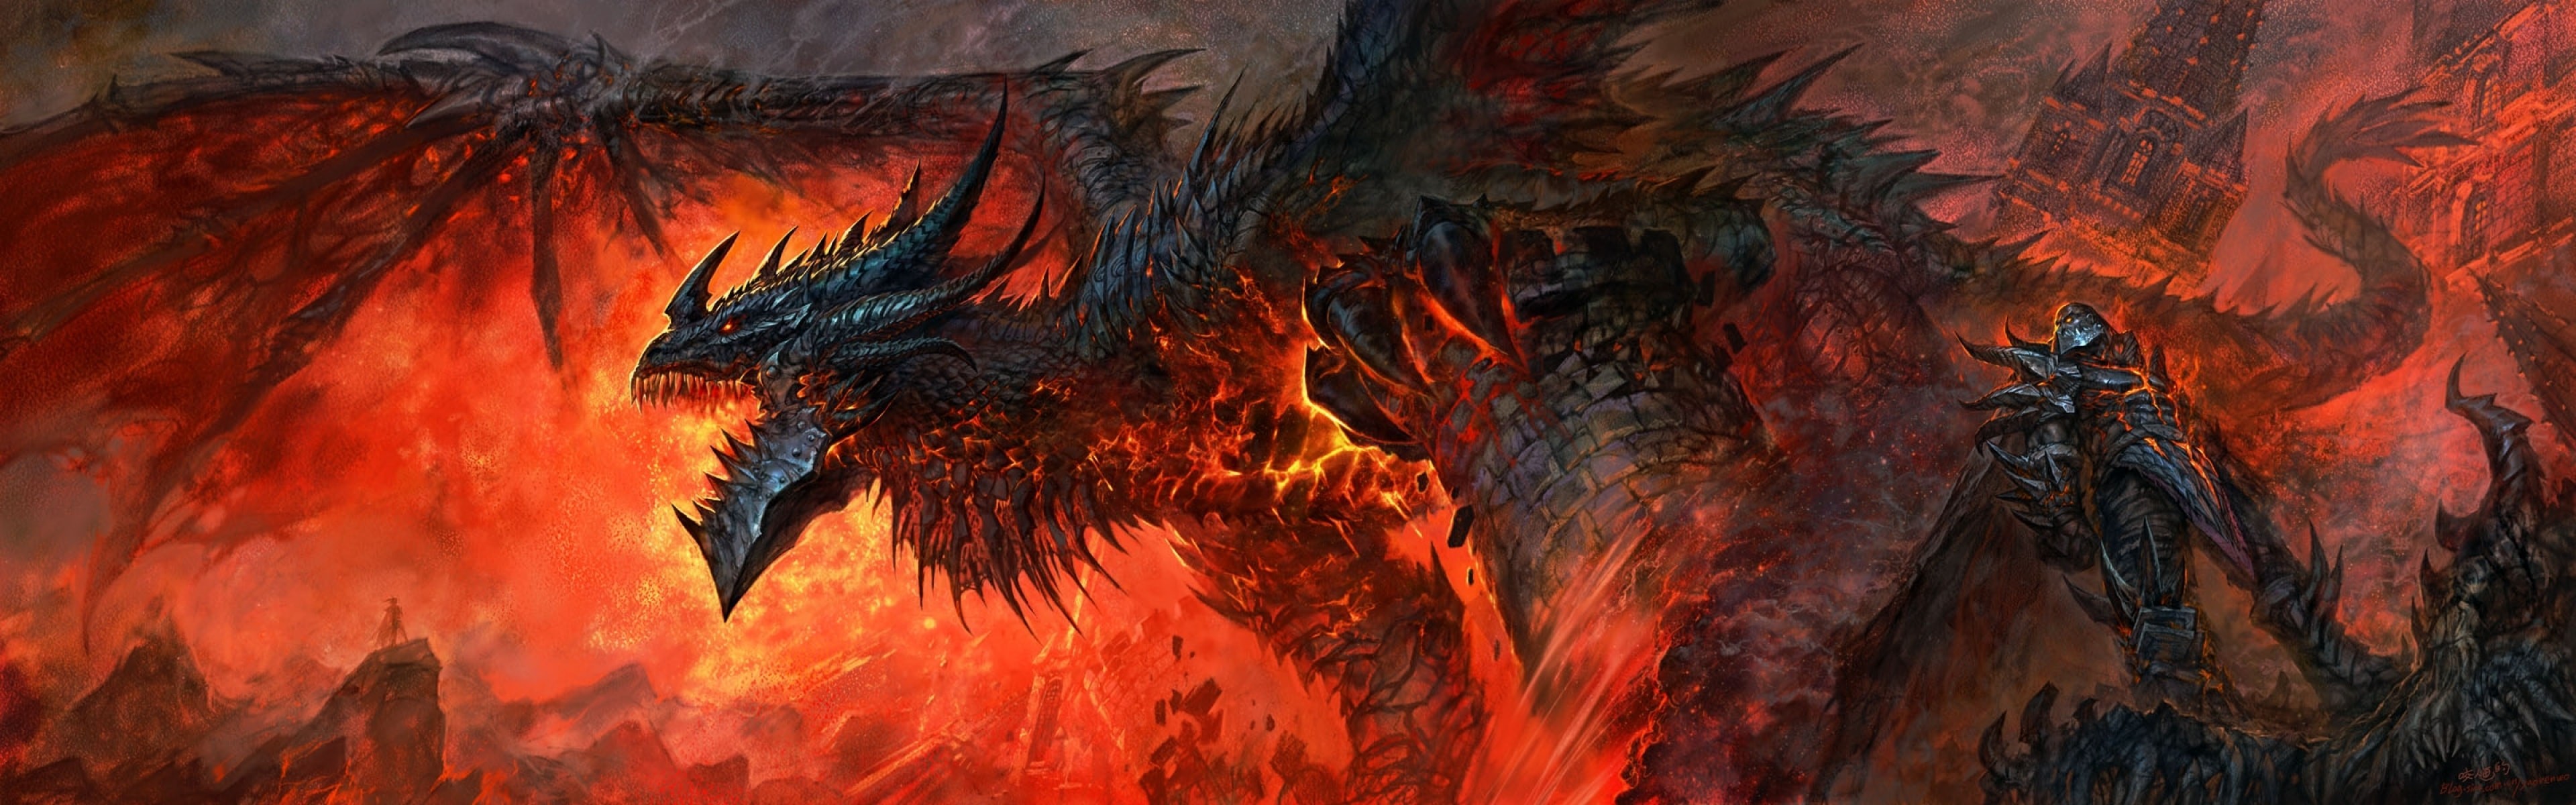 WOW Deathwing HD pics WOW Deathwing Wallpapers hd